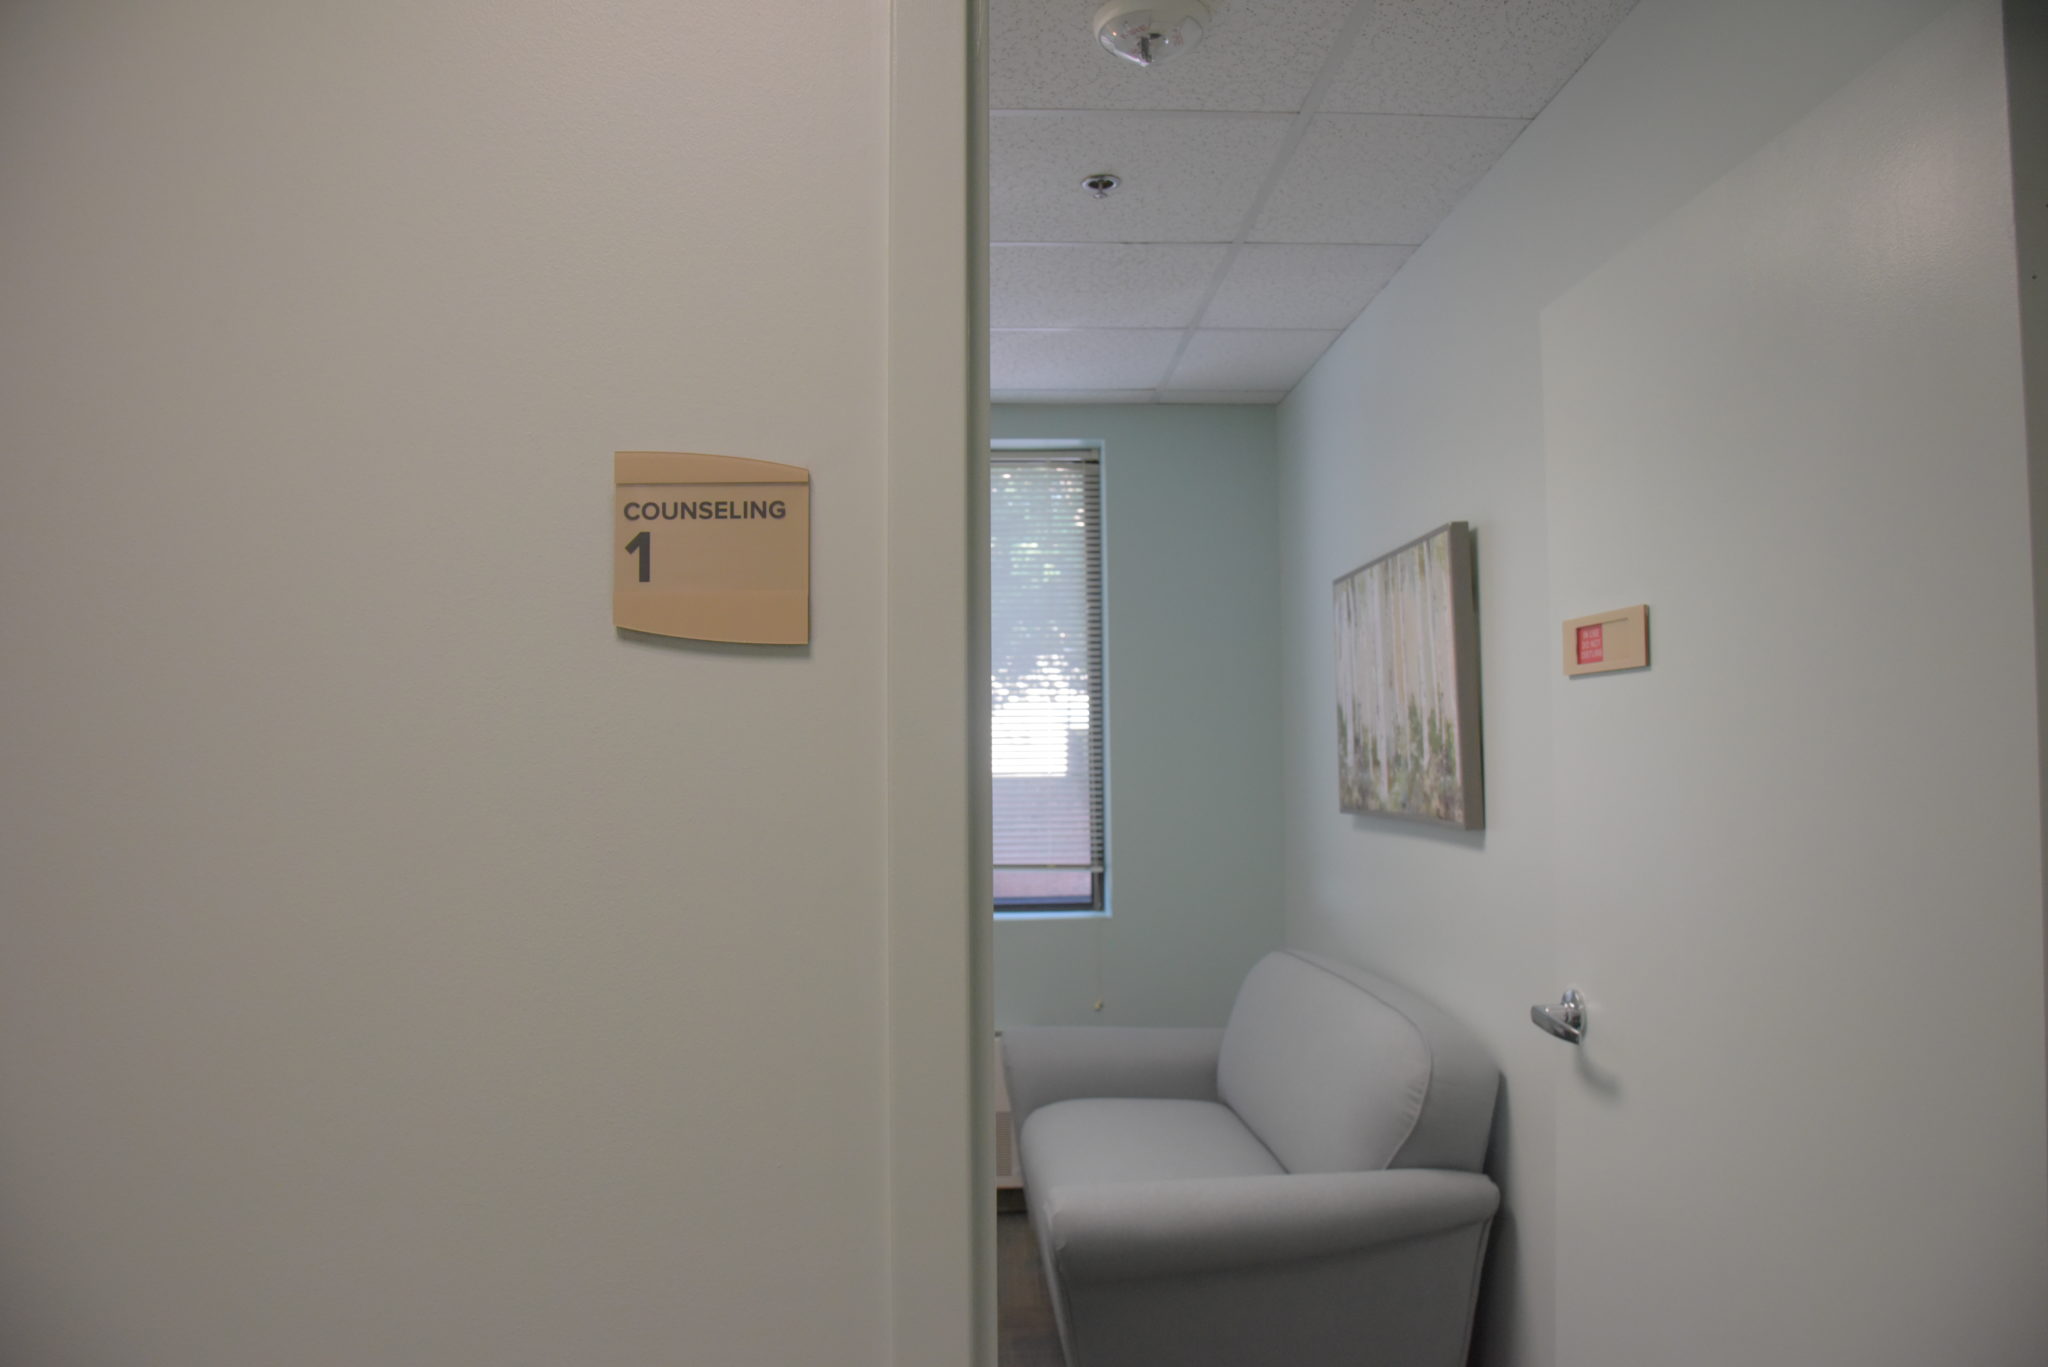 a wall with a sign that reads "counseling 1" and an open doorway that shows a couch against a wall